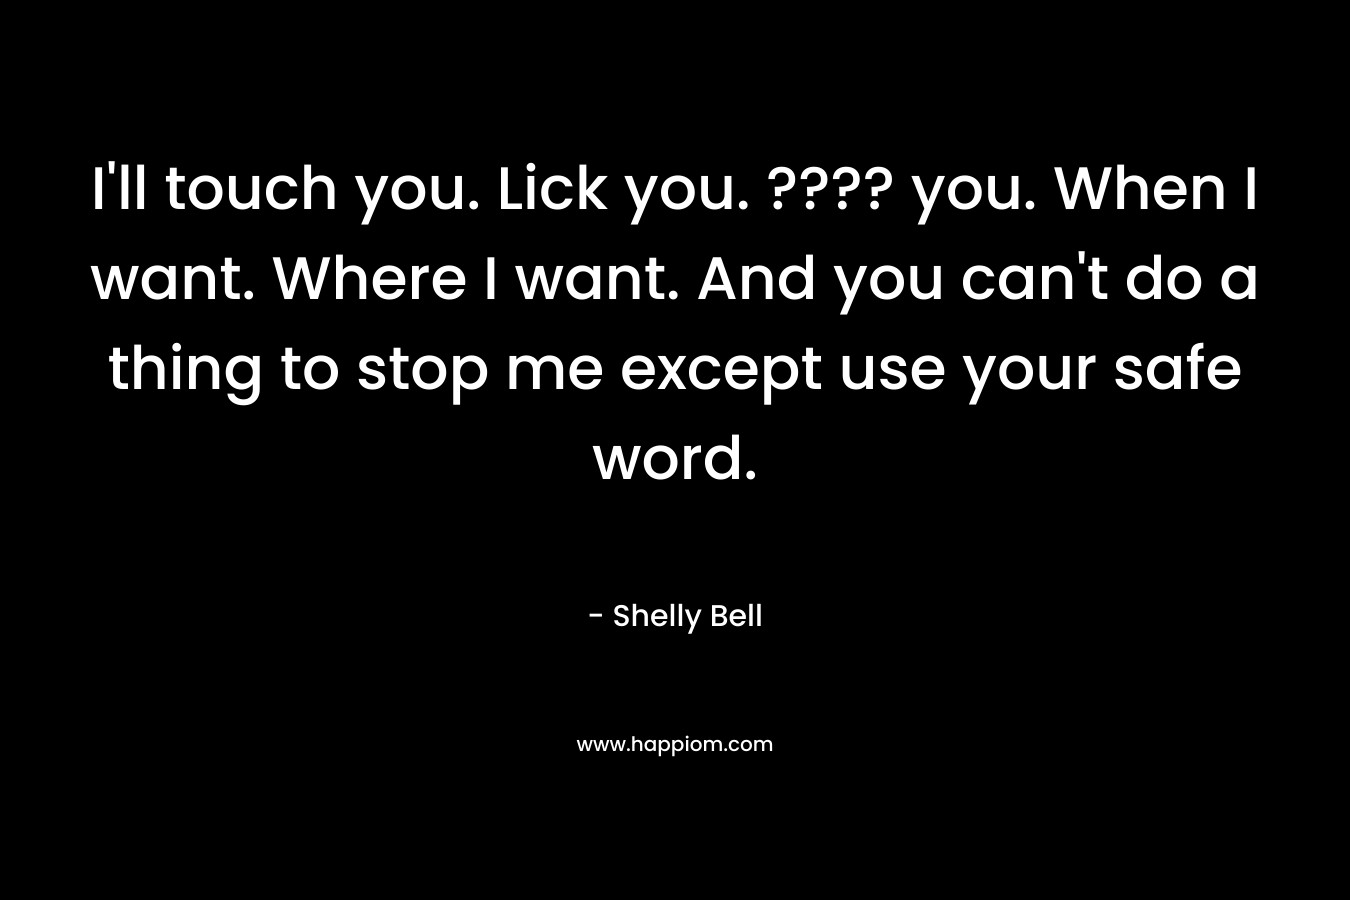 I'll touch you. Lick you. ???? you. When I want. Where I want. And you can't do a thing to stop me except use your safe word.